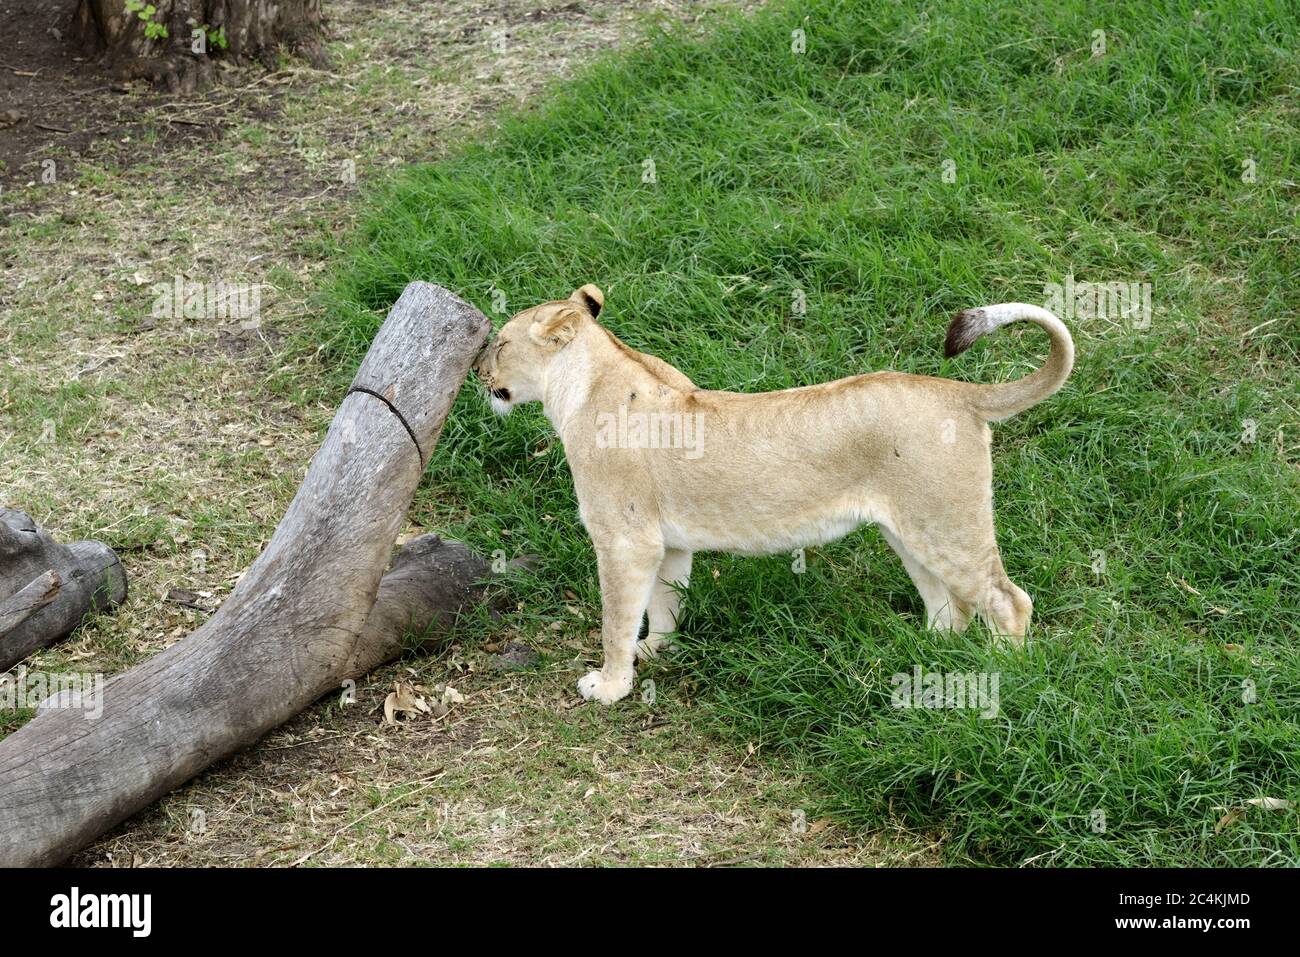 Young lion in Casela park, Mauritius Stock Photo - Alamy